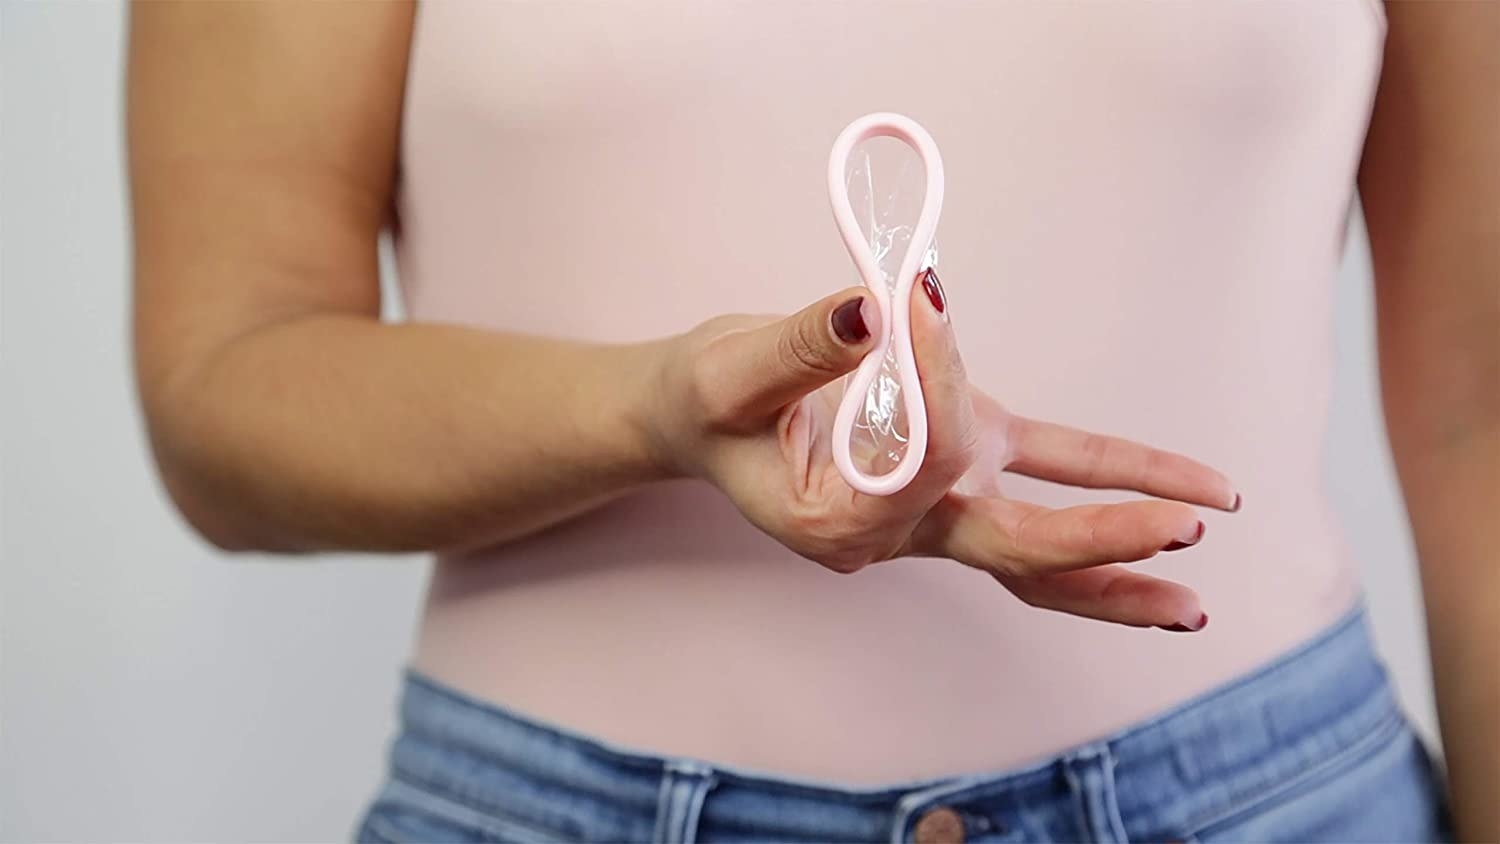 A person holding out the menstrual disc and pinching it between their fingers